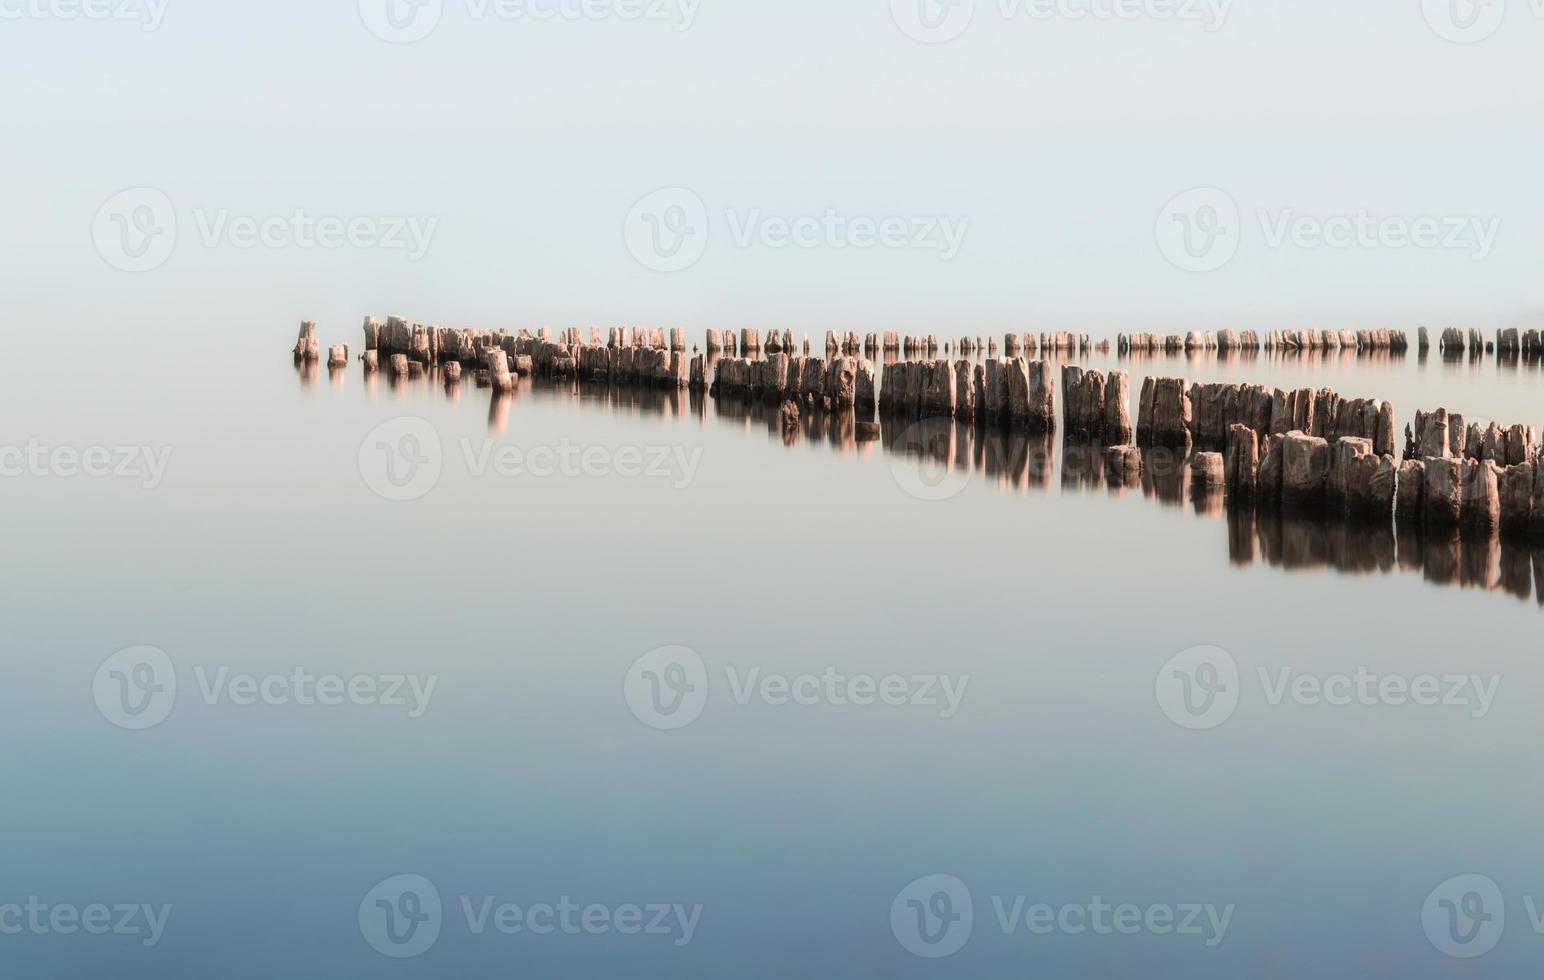 Old wooden sticks in water photo